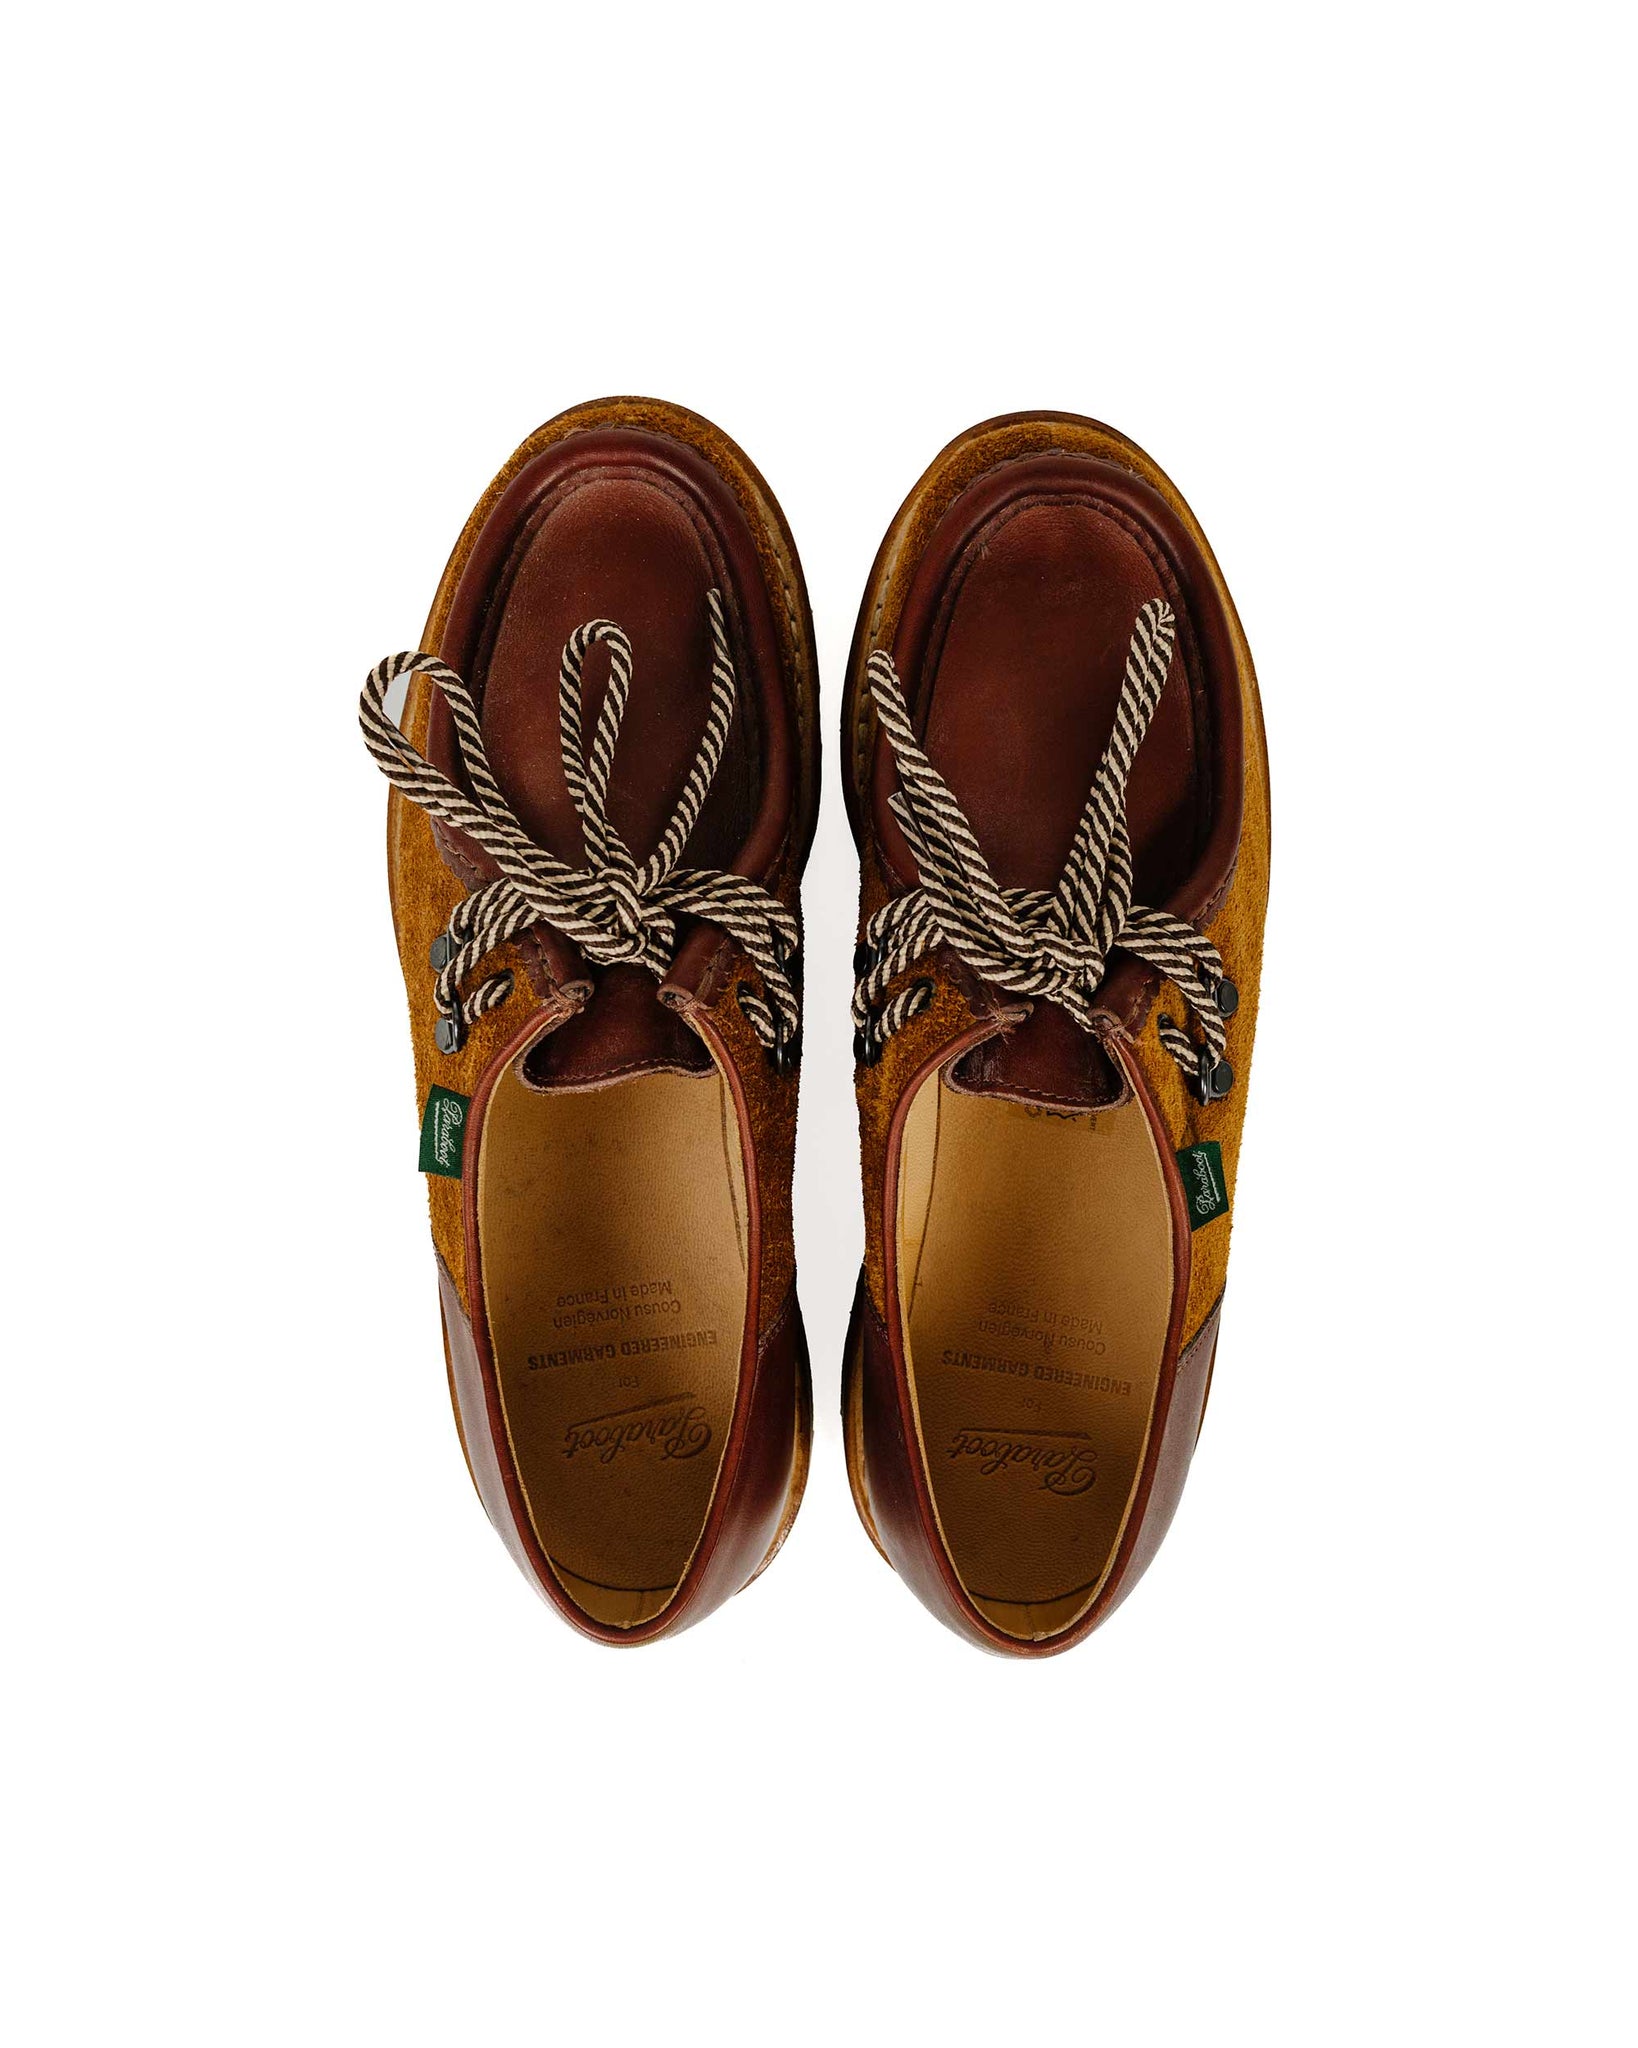 Paraboot x Engineered Garments Michael Lisse Marron/Velours Whisky Top 